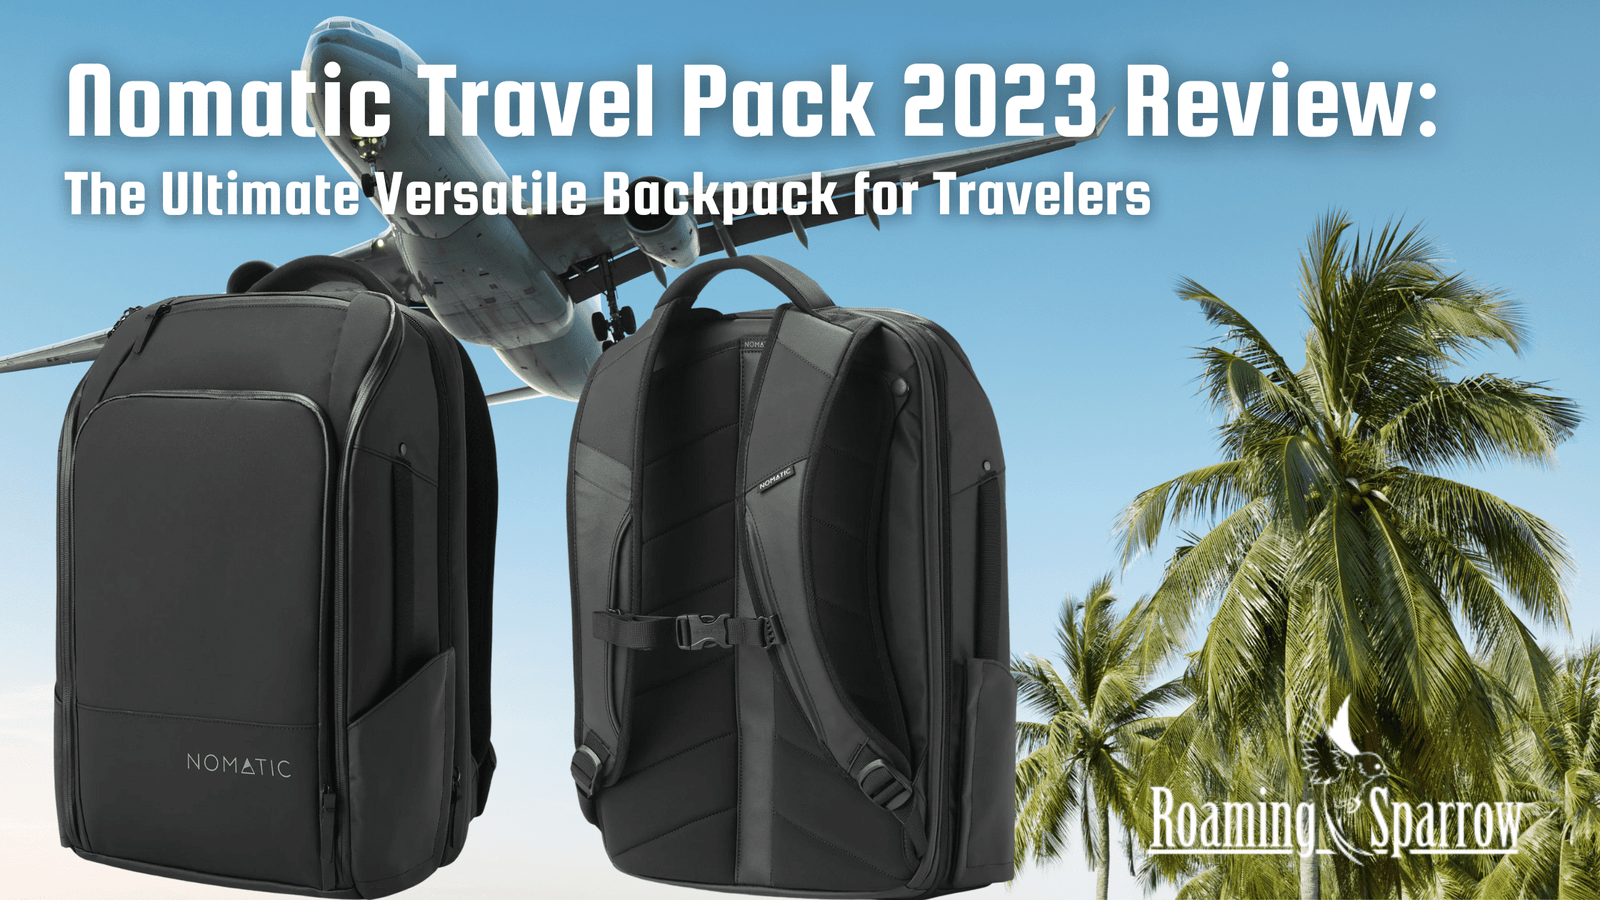 Nomatic Travel Pack 2023 Review: 